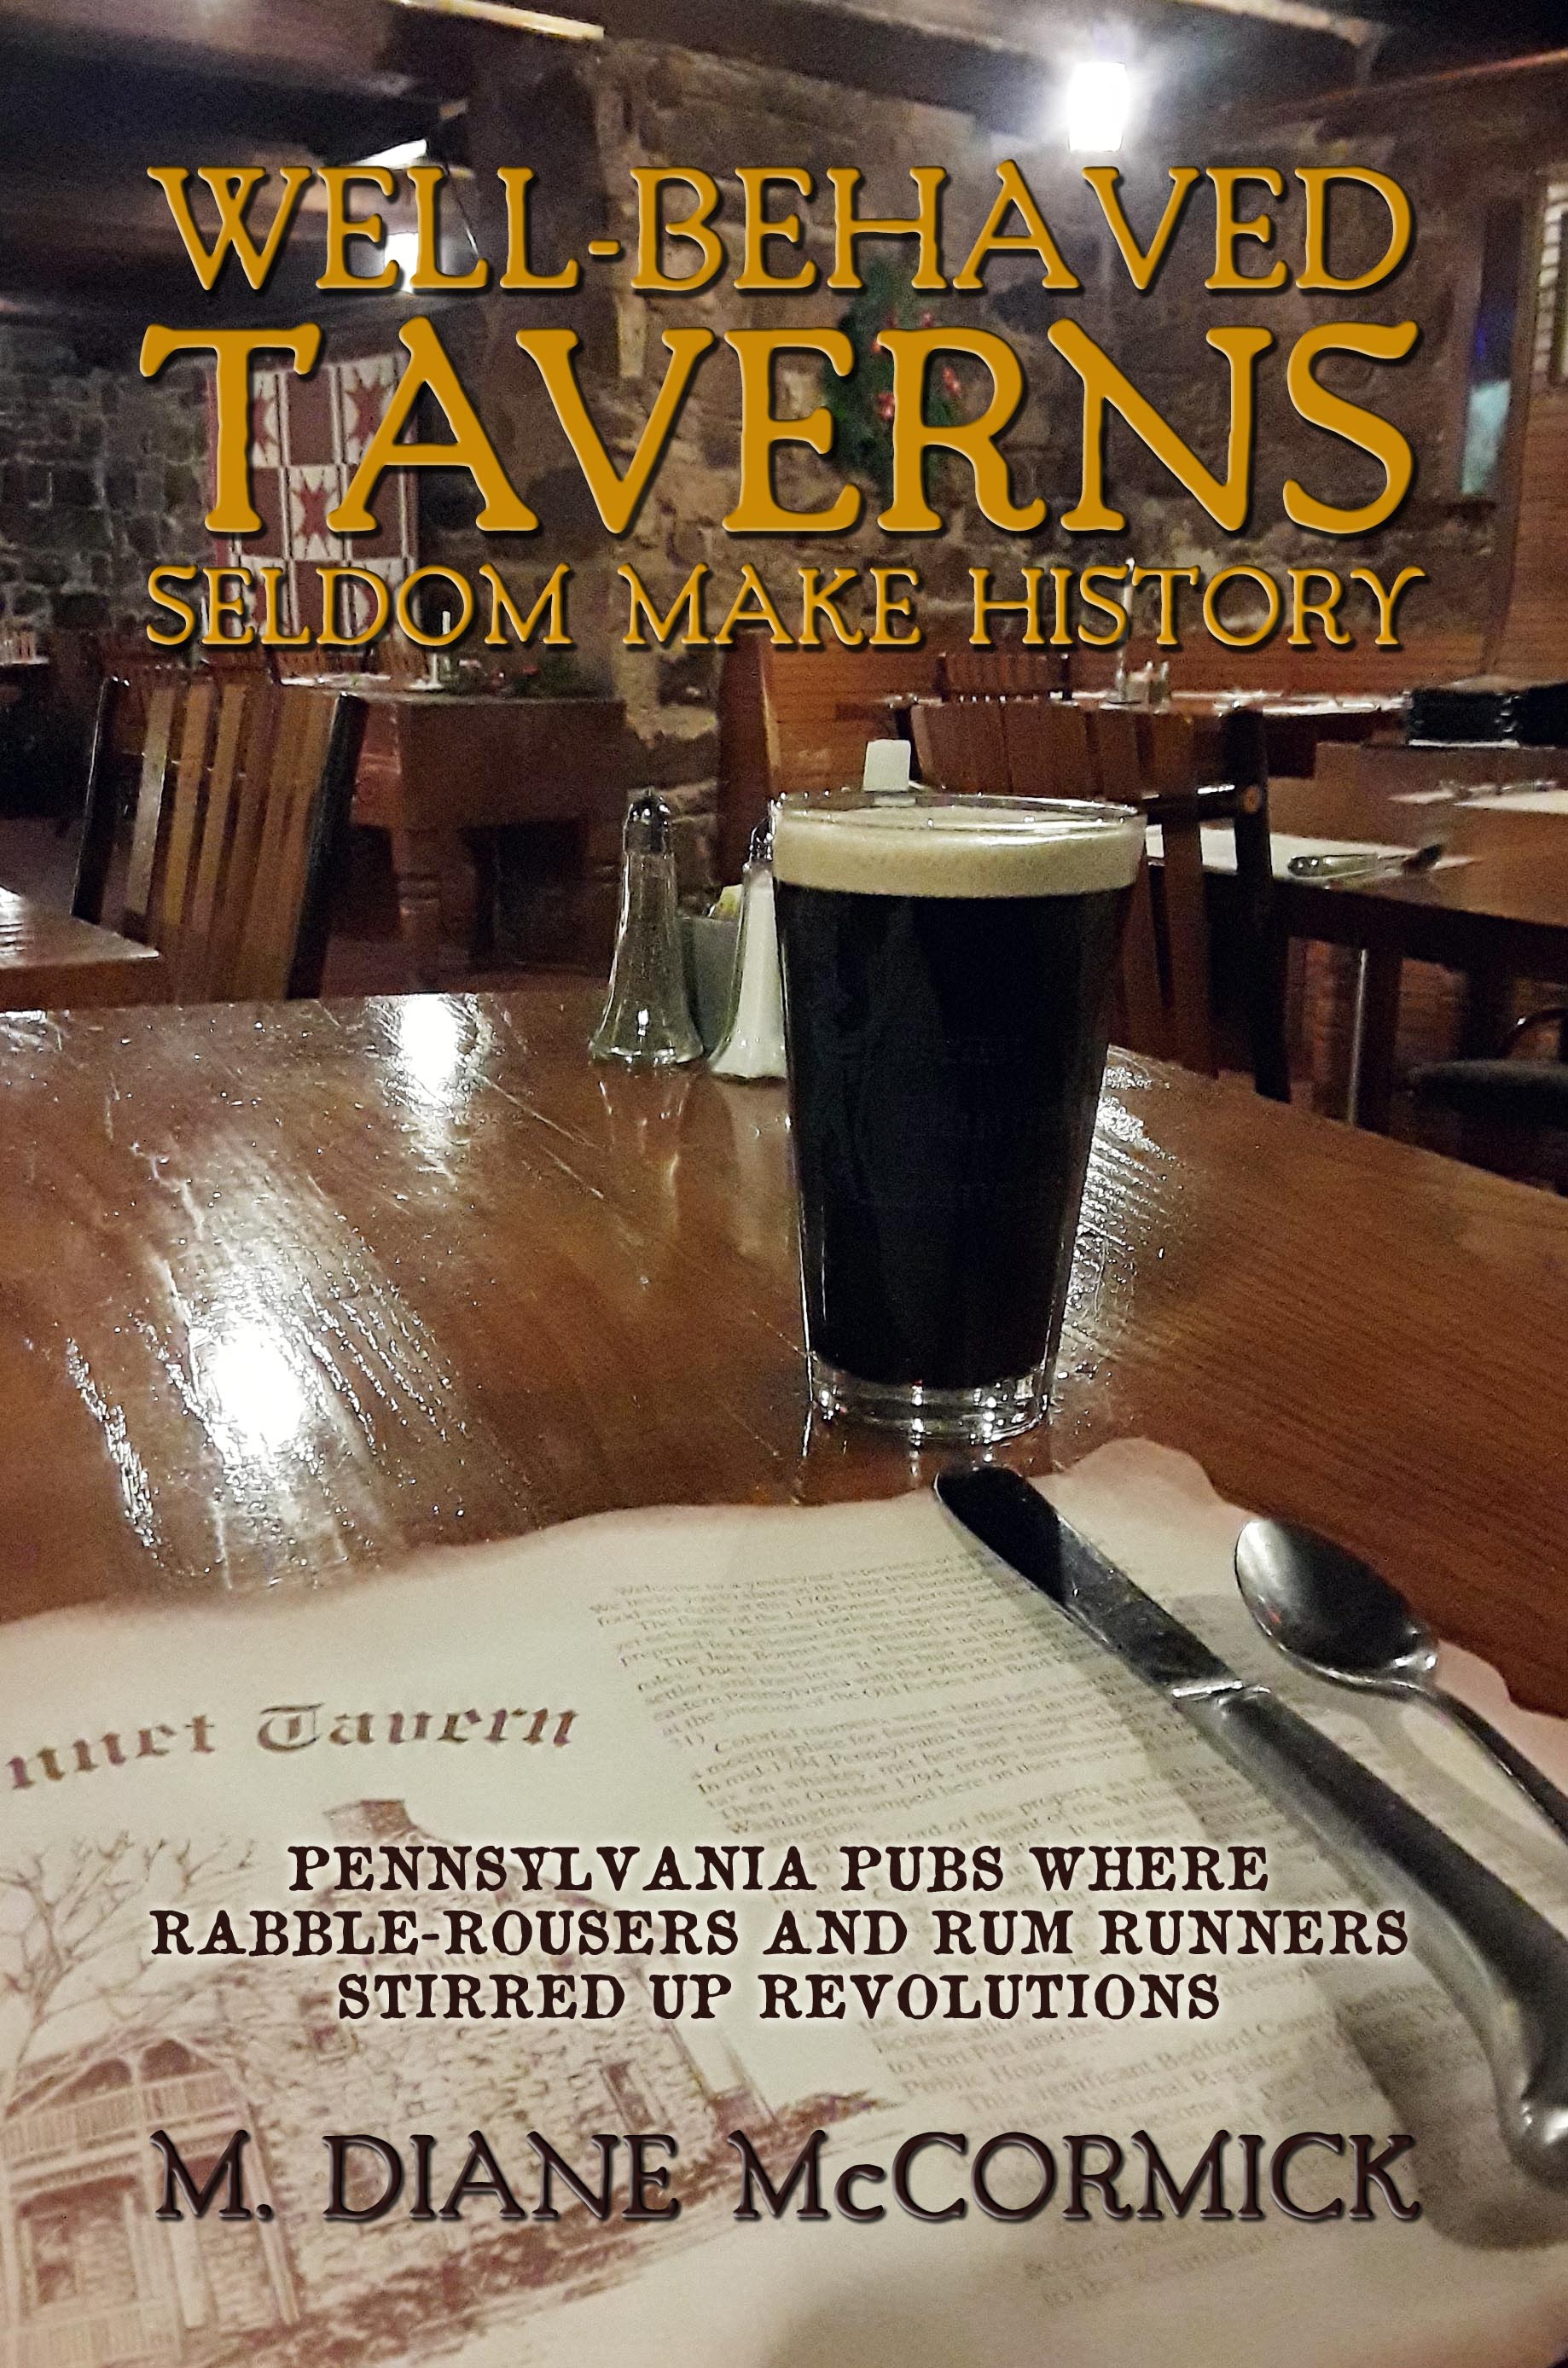 Diane McCormick’s “Well-behaved Taverns Seldom Make History” three-peats as the Sunbury Press bestseller for January